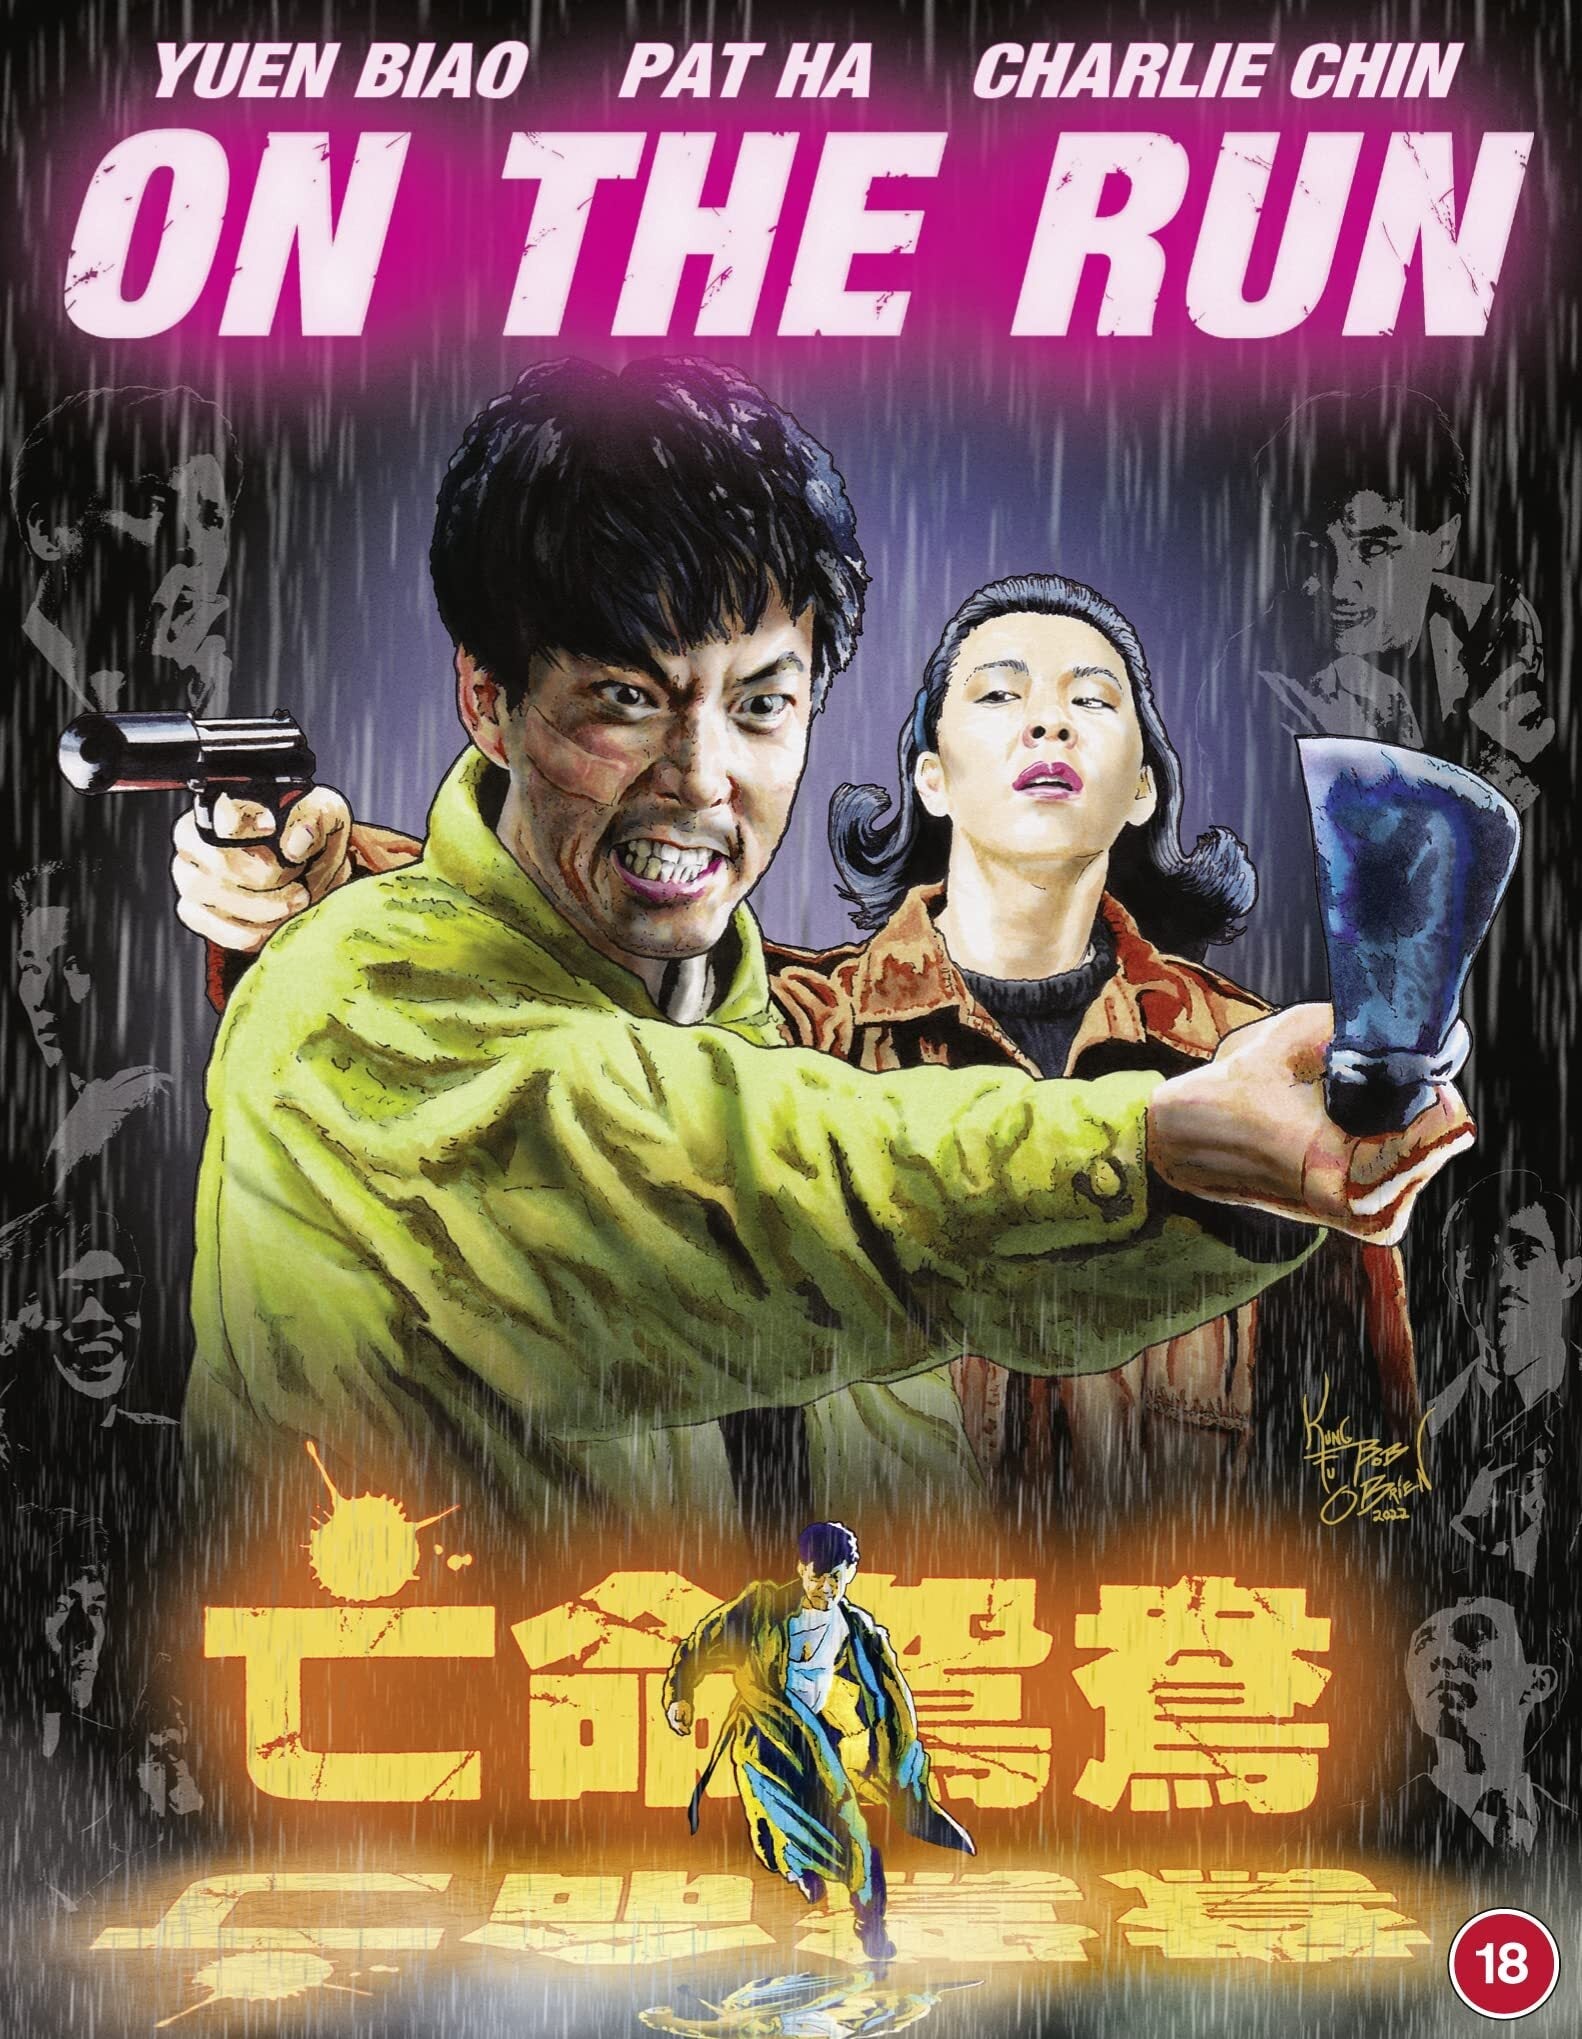 ON THE RUN (REGION B IMPORT - LIMITED EDITION) BLU-RAY [SCRATCH AND DENT]